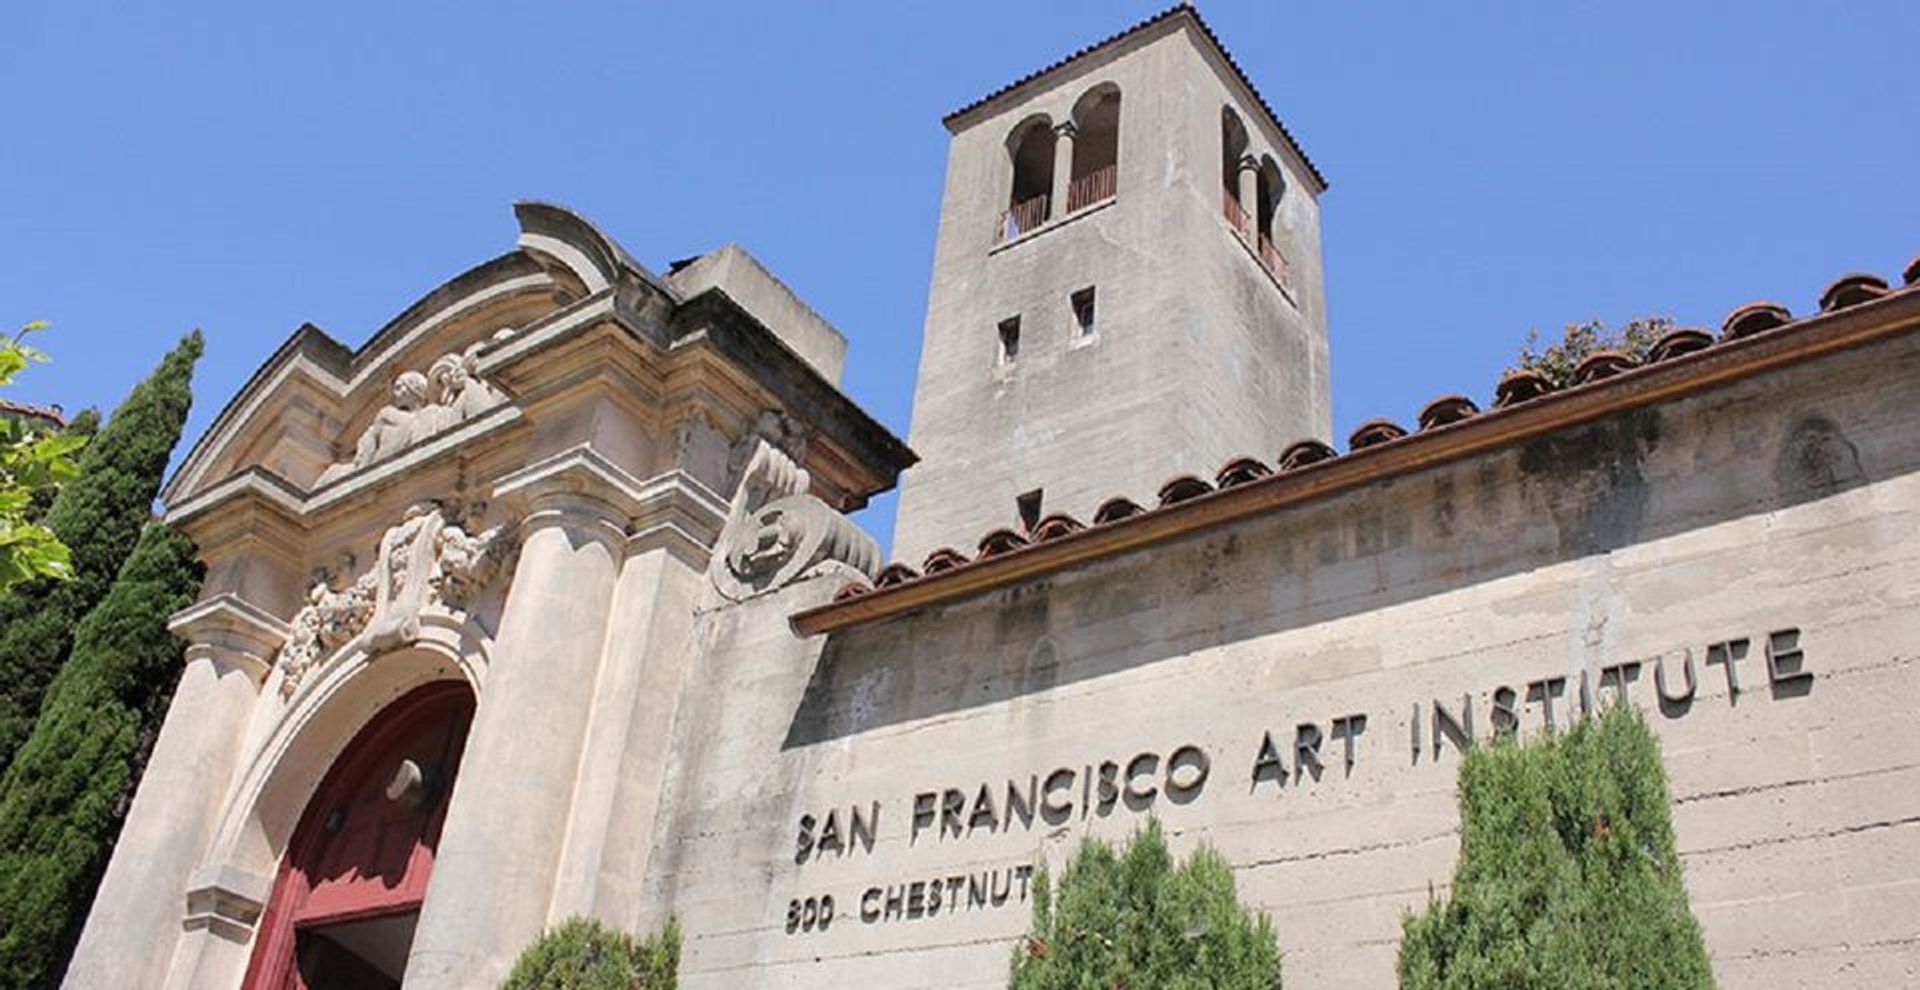 The San Francisco Art Institute plans to remain open Courtesy of bart.gov